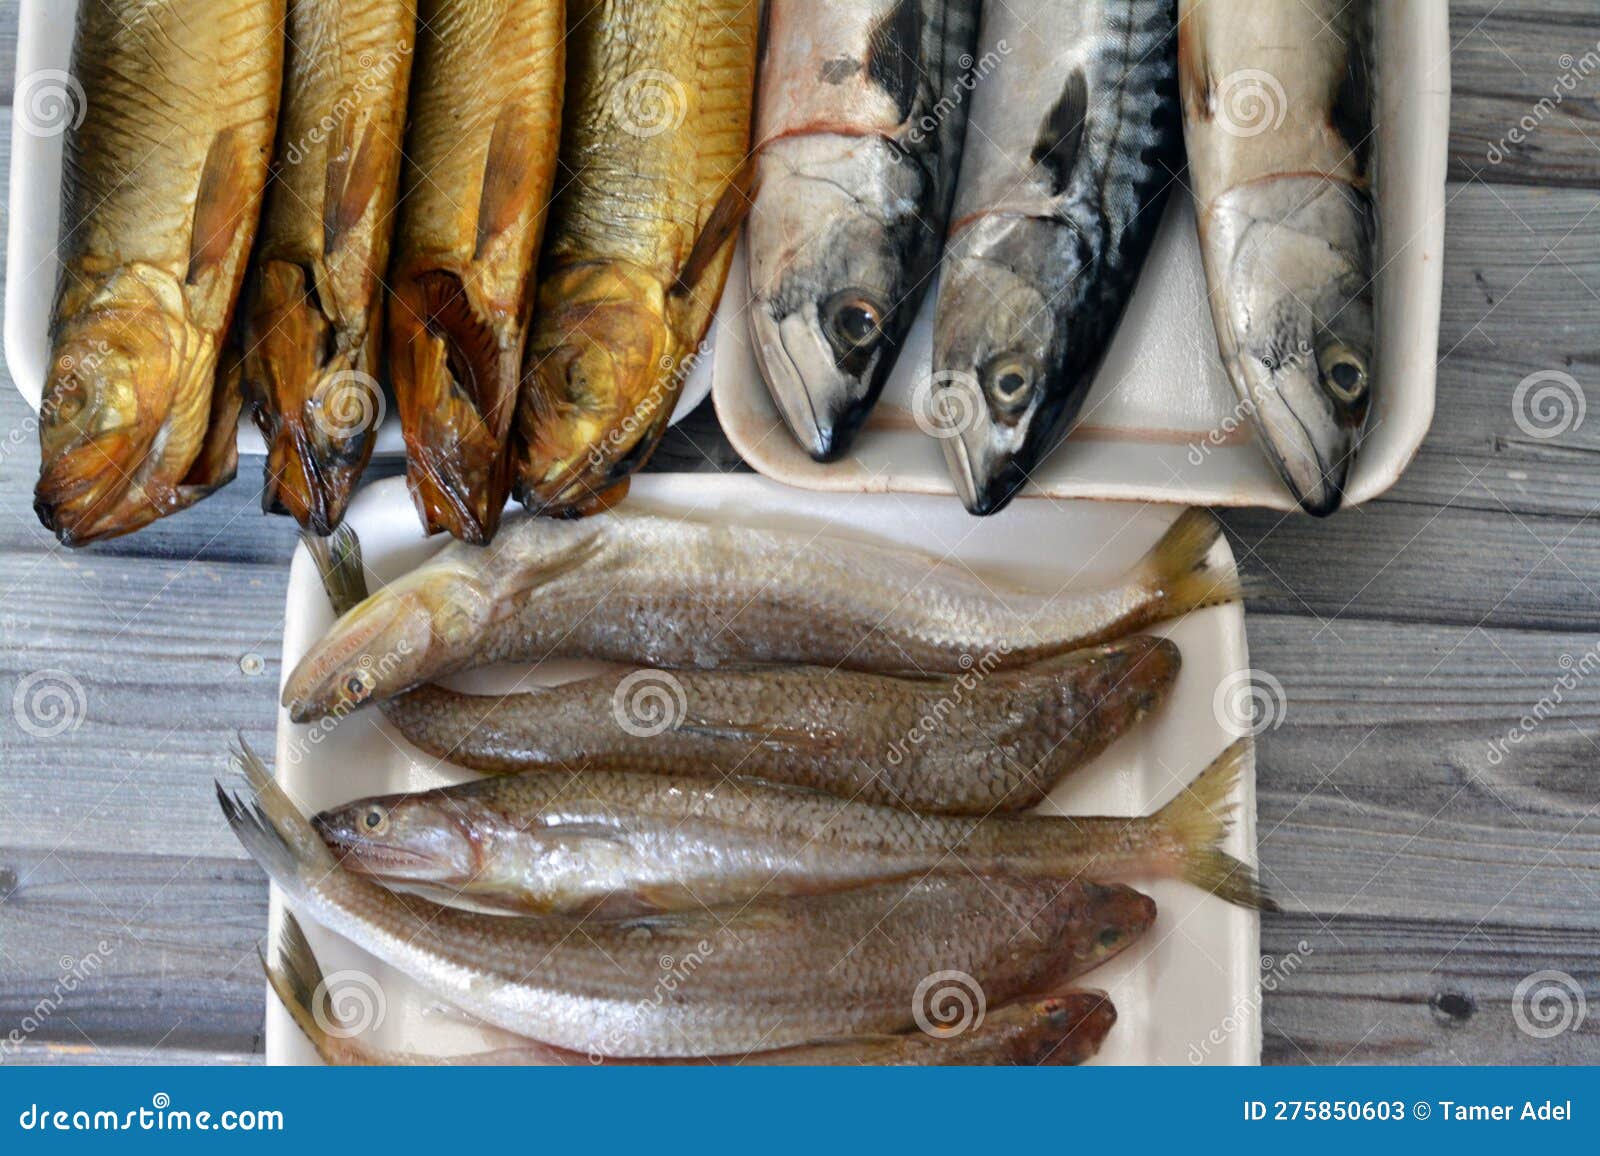 various types of raw fishes of mackerel fish, saurida undosquamis, the brushtooth lizardfish, large-scale grinner or largescale